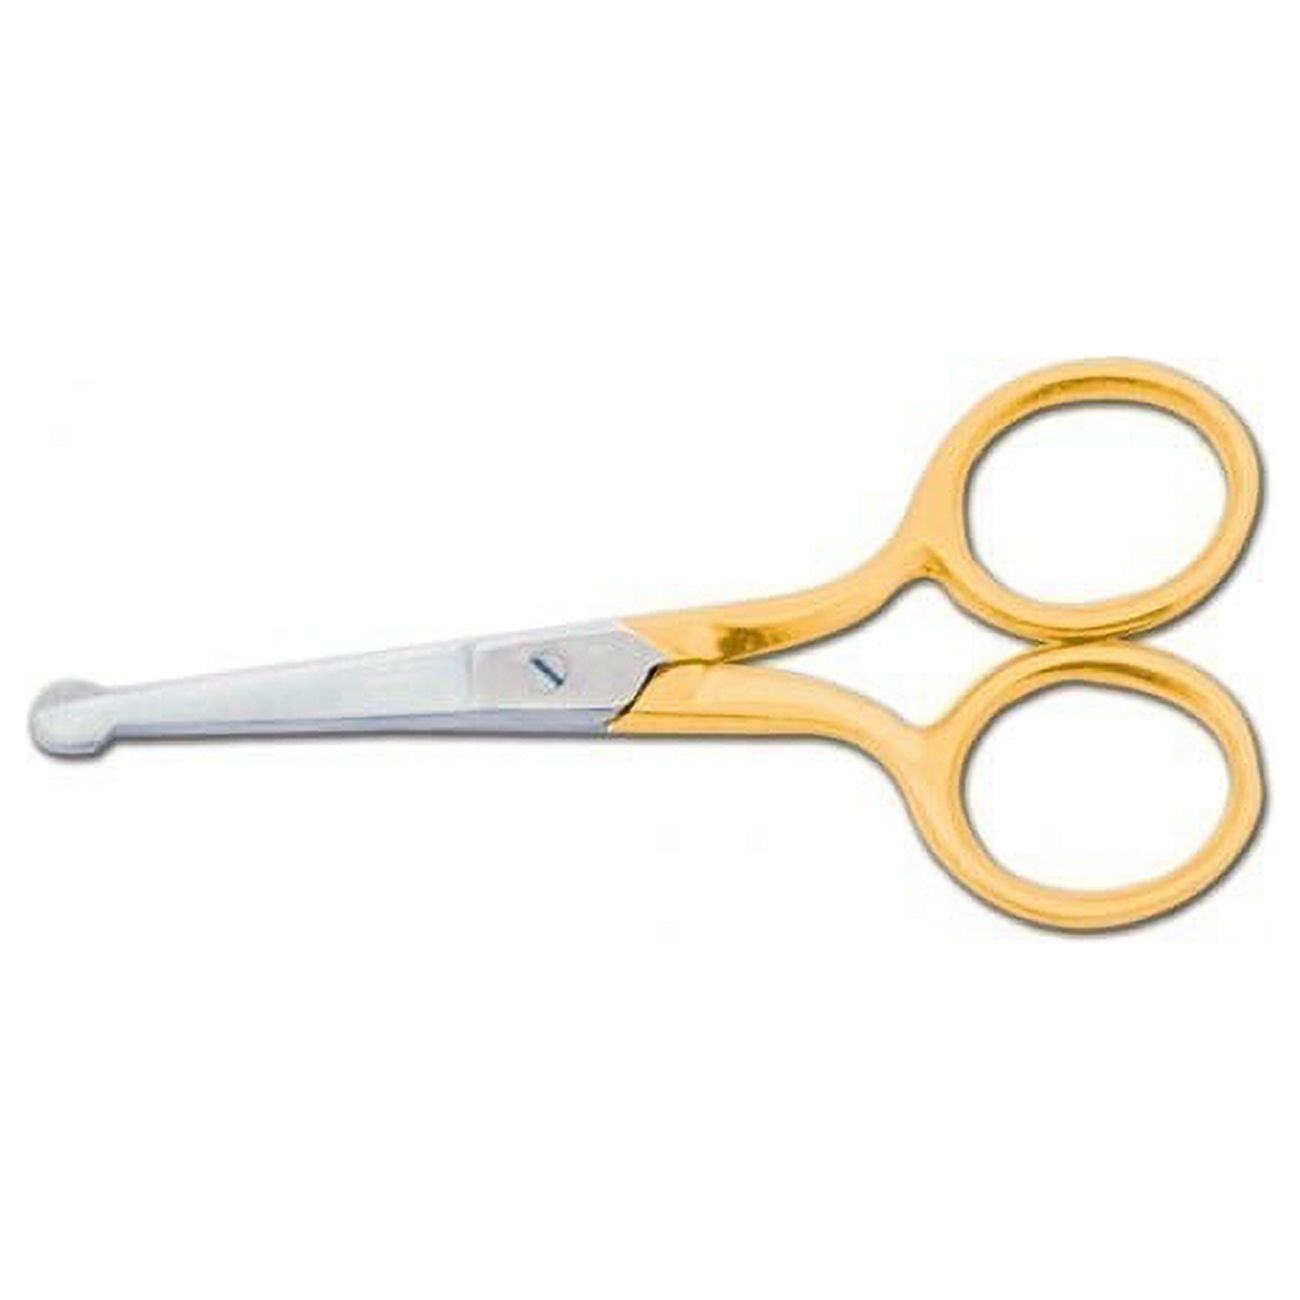 Defender Stainless 3.5-inch Safety Scissors 